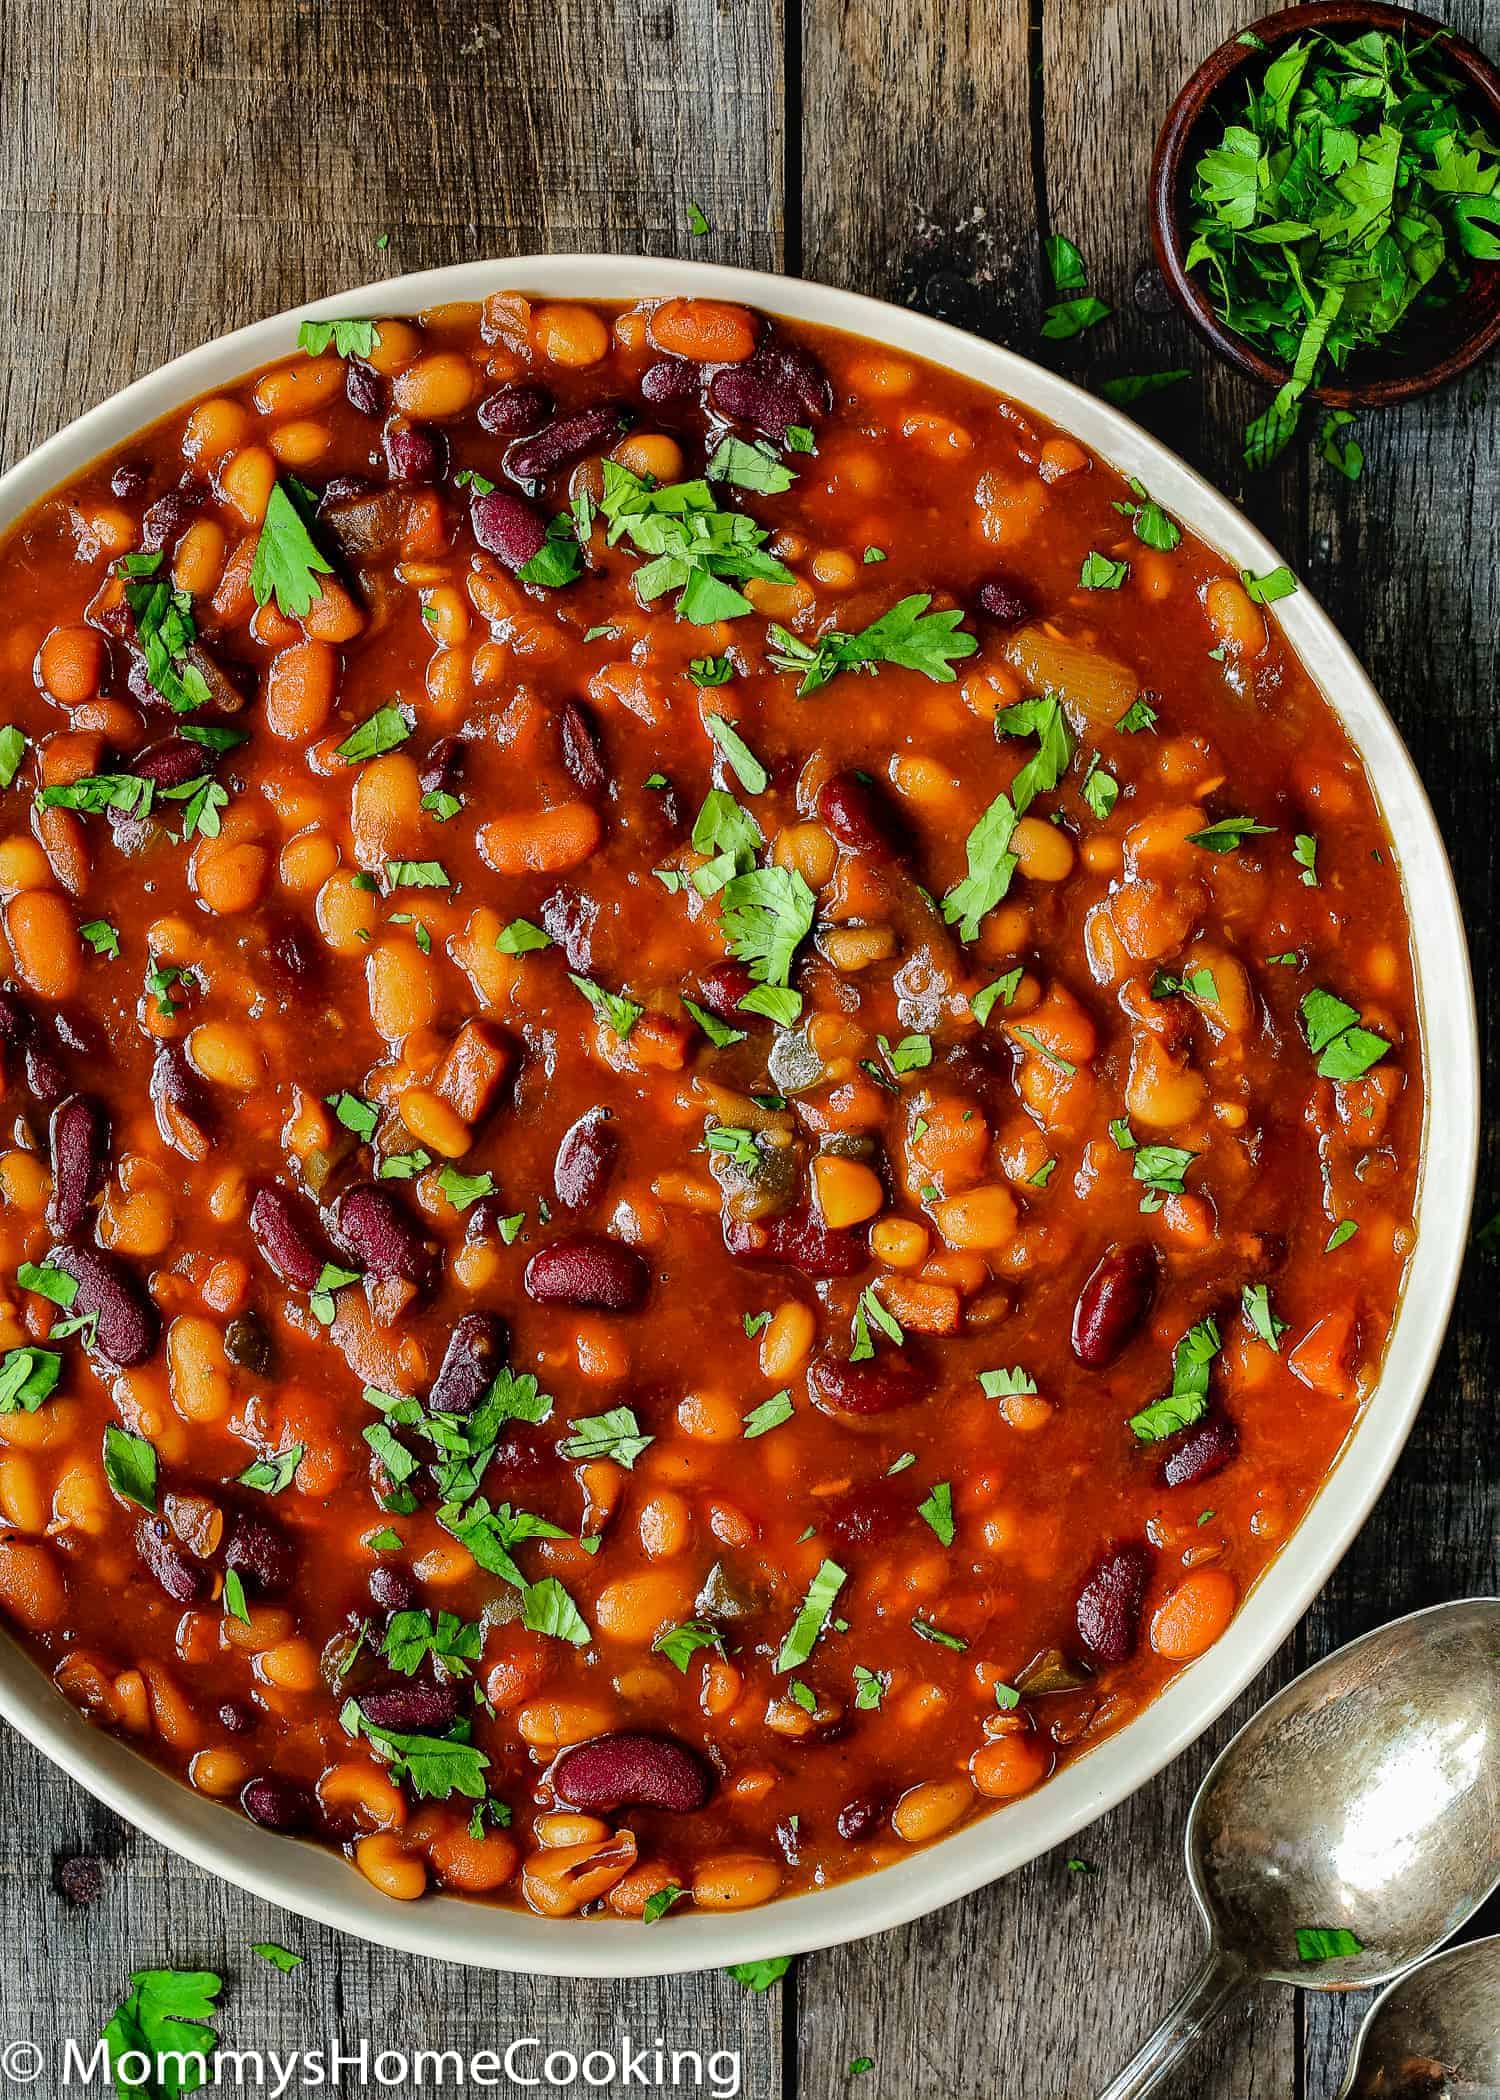 Instant Pot Baked Beans in a bowl with chopped cilantro.